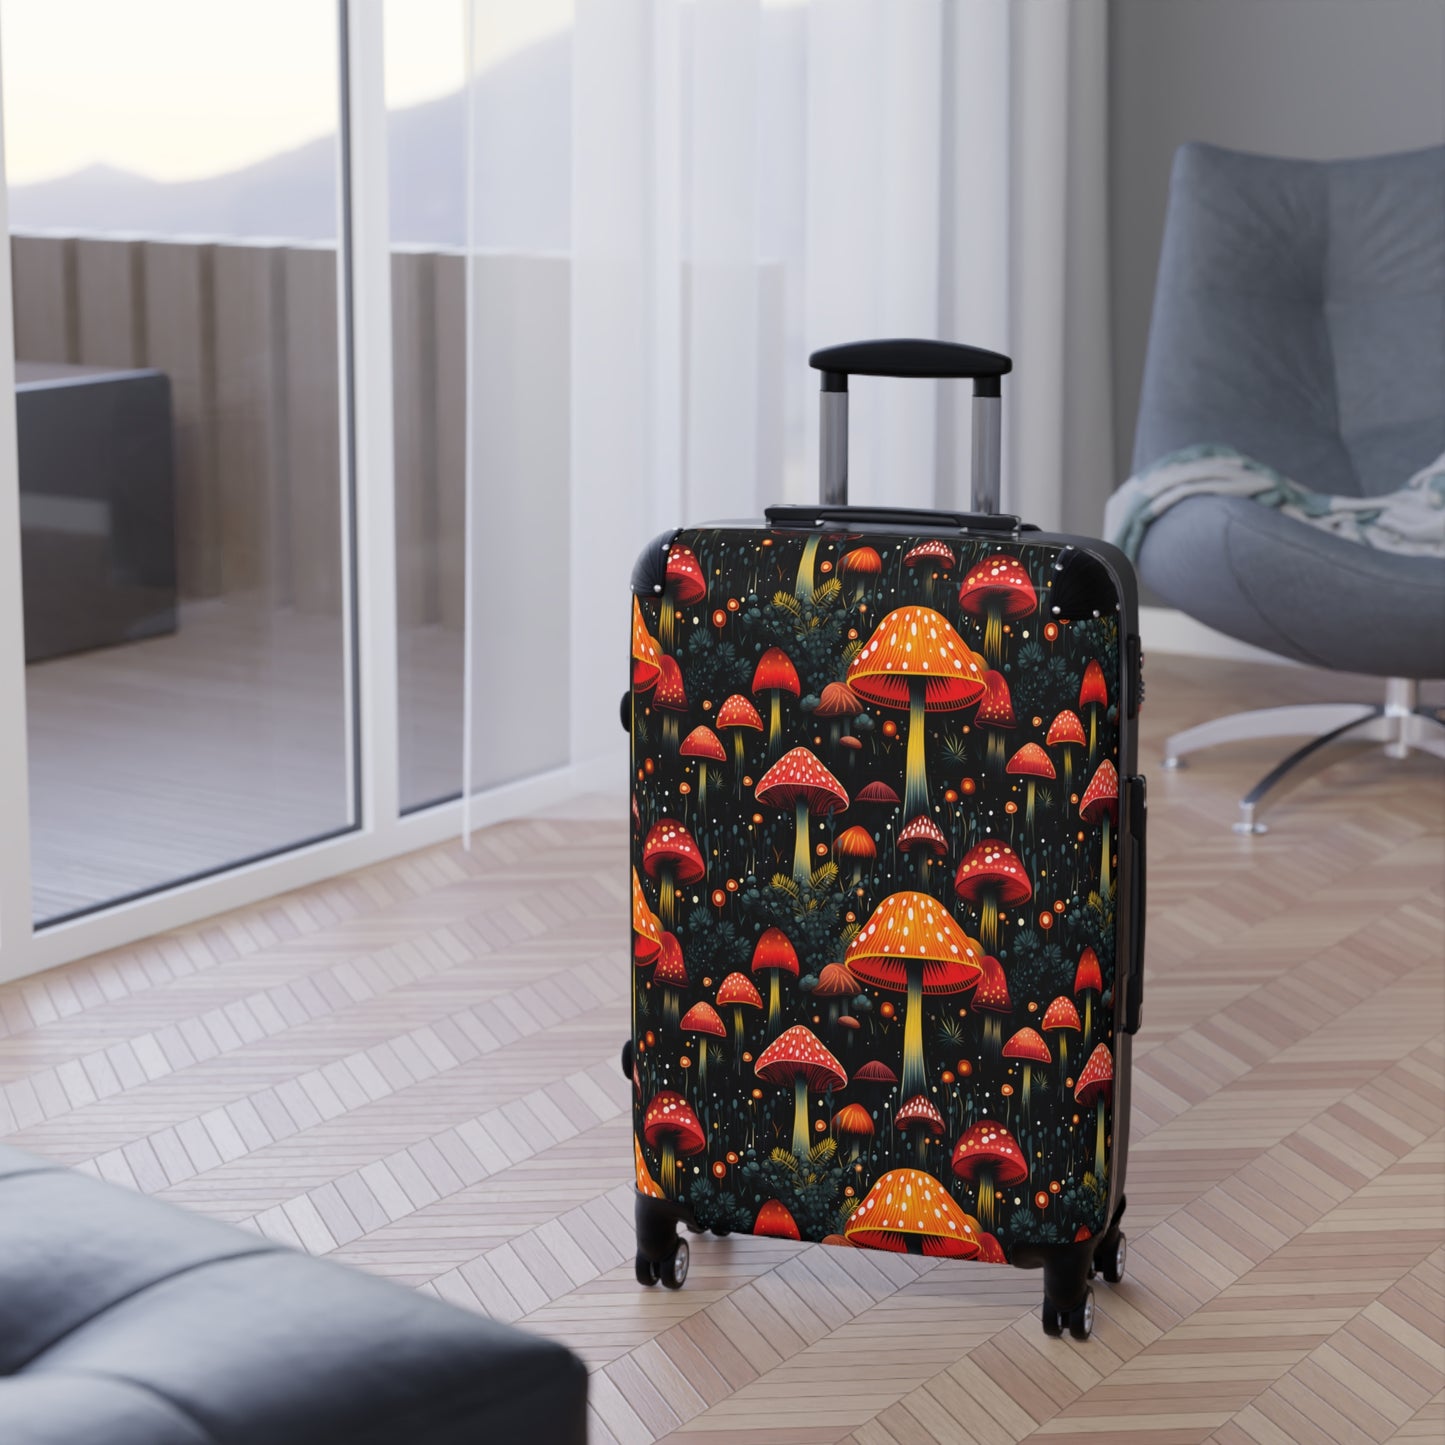 Psychedelic Mushrooms Stylish & Unique Hard-Shell Suitcase: Durable, Lightweight, Expandable Luggage with 360° Swivel Wheels & Secure Lock for Fashion-Forward Travelers, Free US Shipping